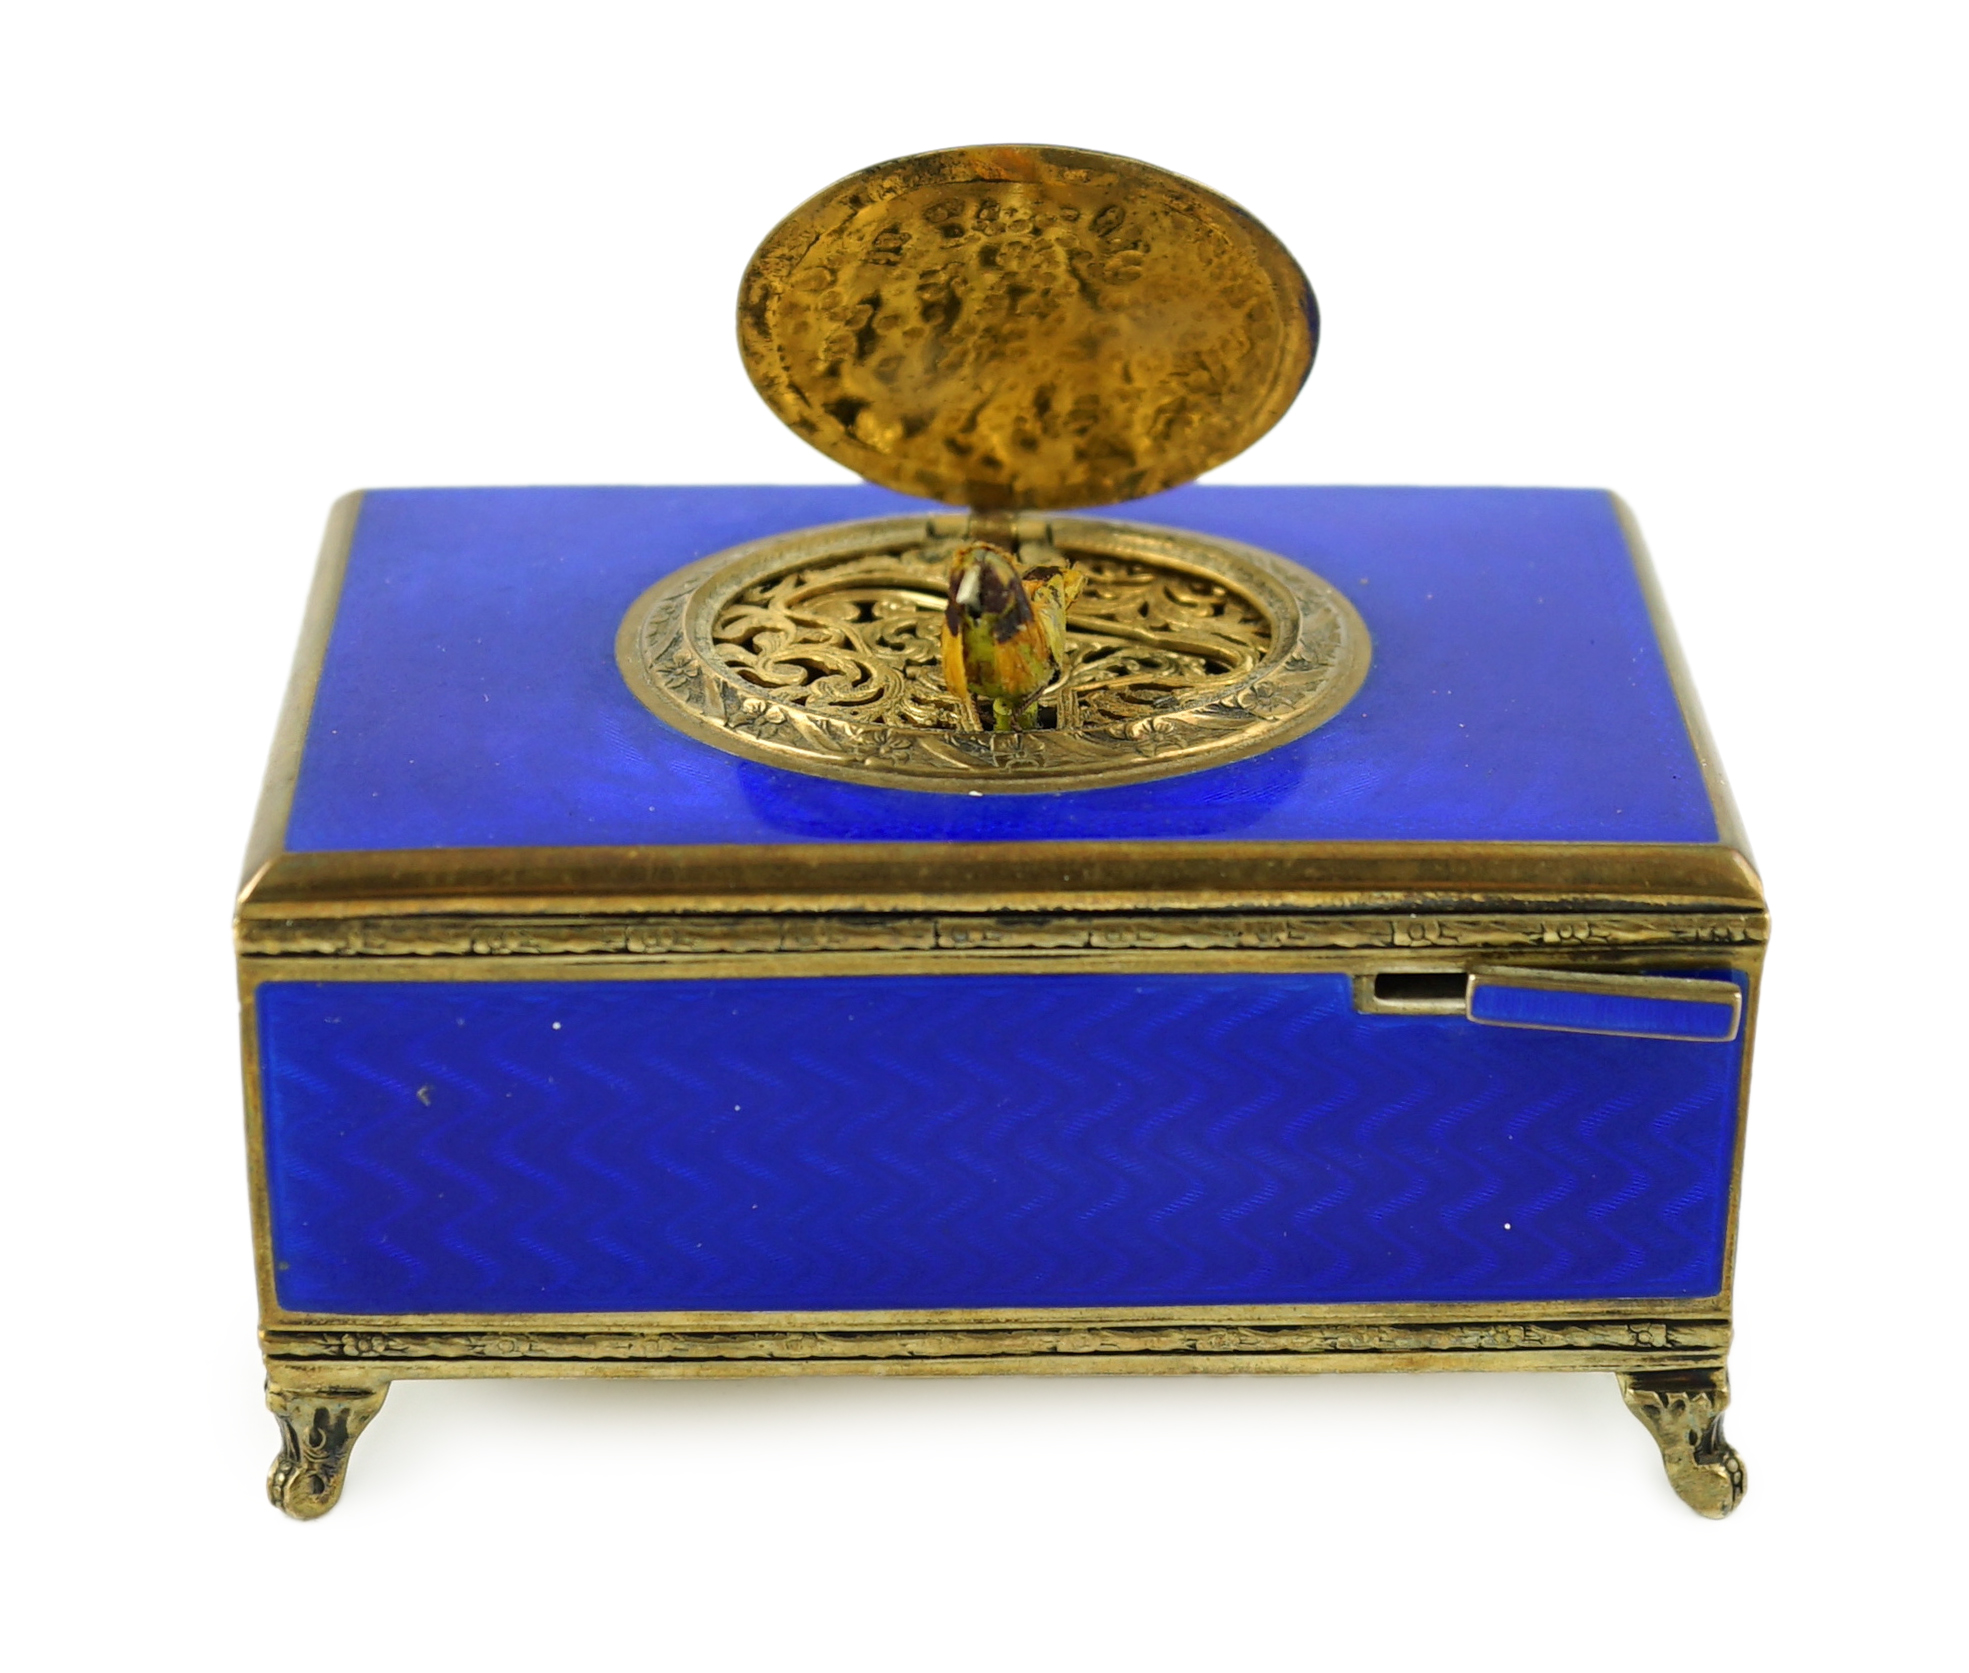 An early 20th century sterling silver gilt and blue guilloche enamelled rectangular singing bird box